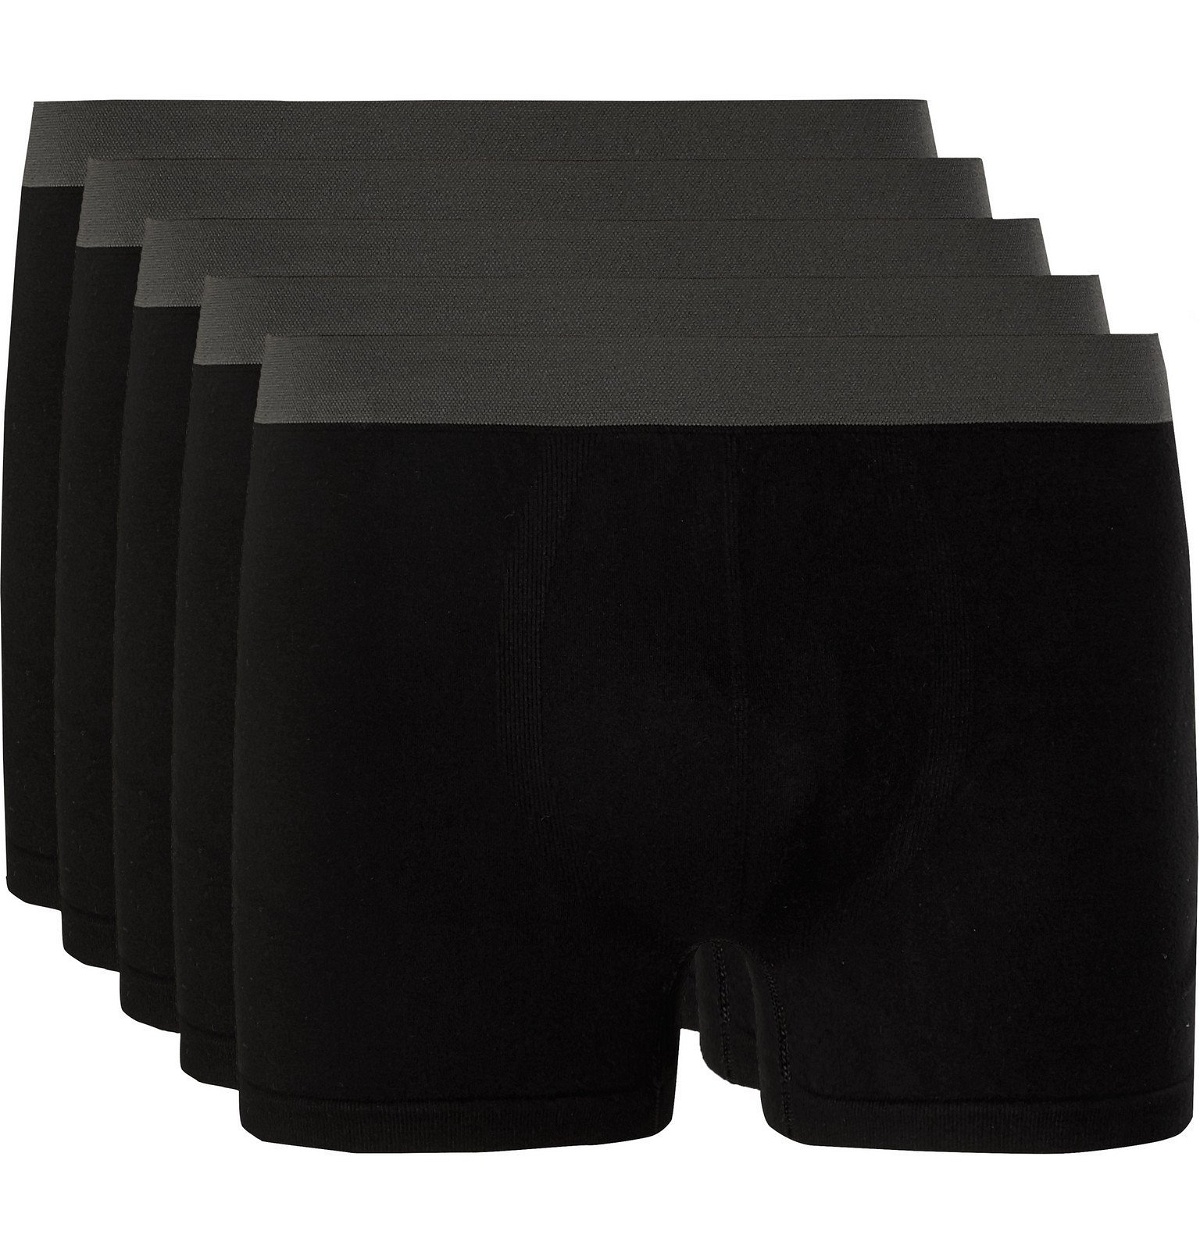 Hamilton and Hare - Pack of Five Bamboo-Blend Boxer Briefs - Black ...